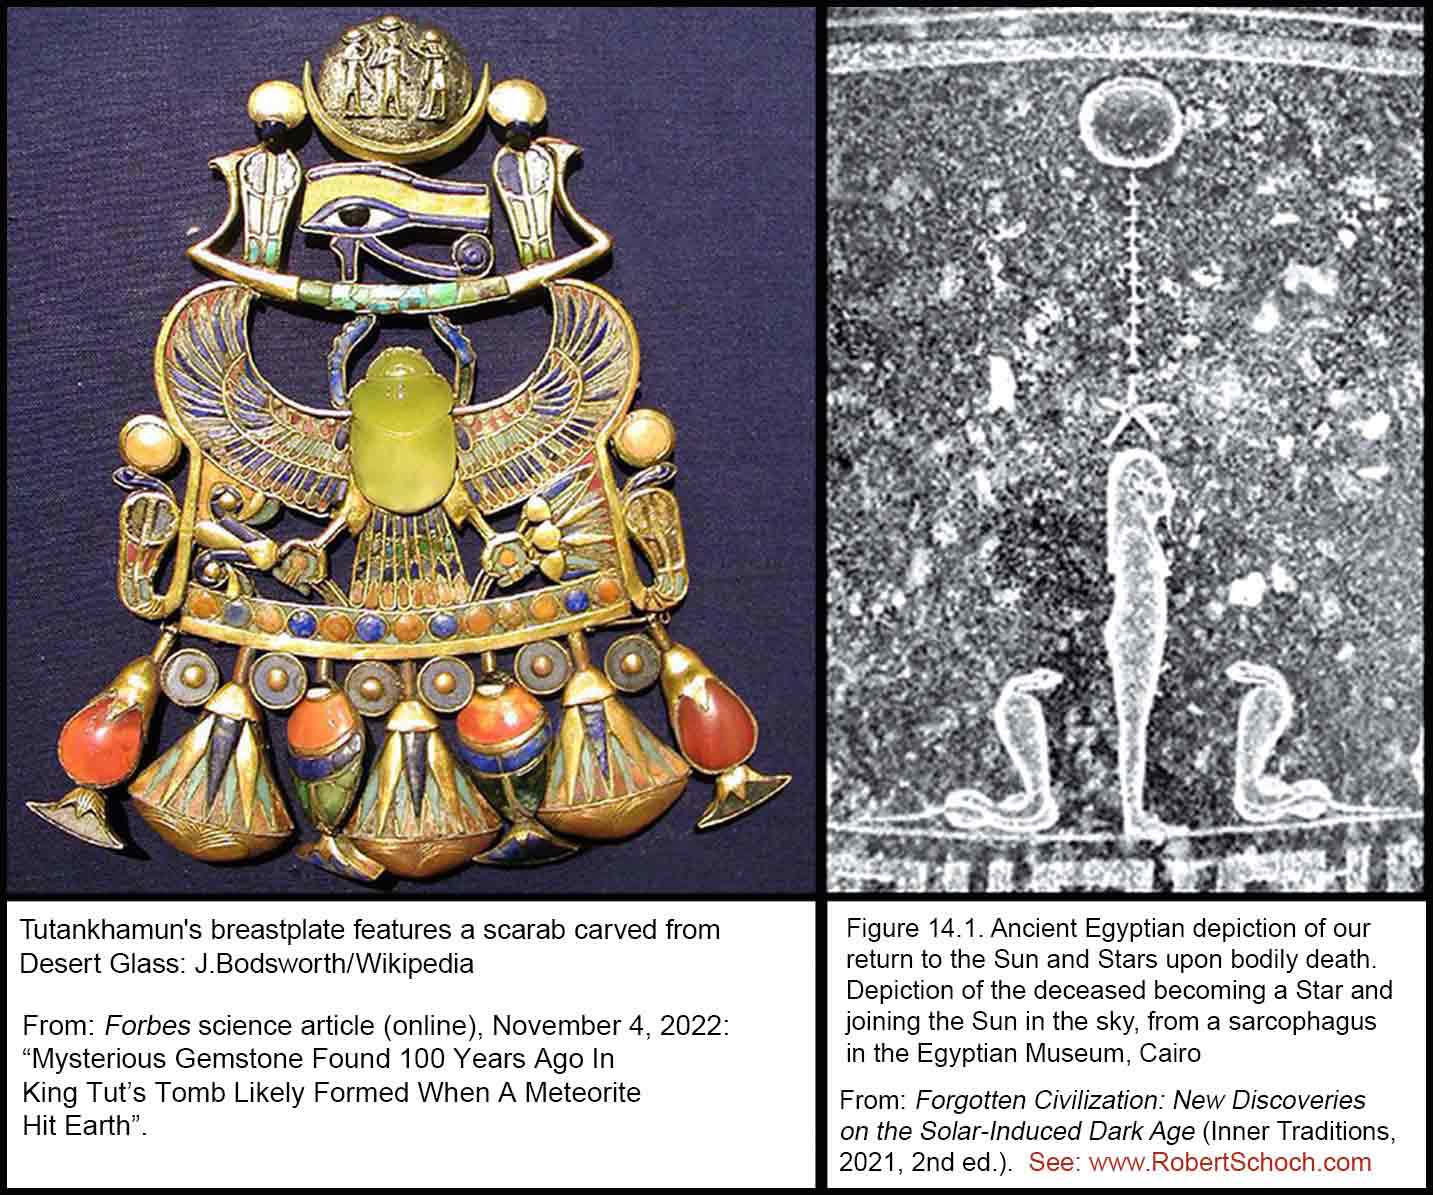 Acomposite image of King Tutankhamun's breastplate and a depiction of our 
					return to the stars upon death on a sarchophogus in the Egyptian Museum